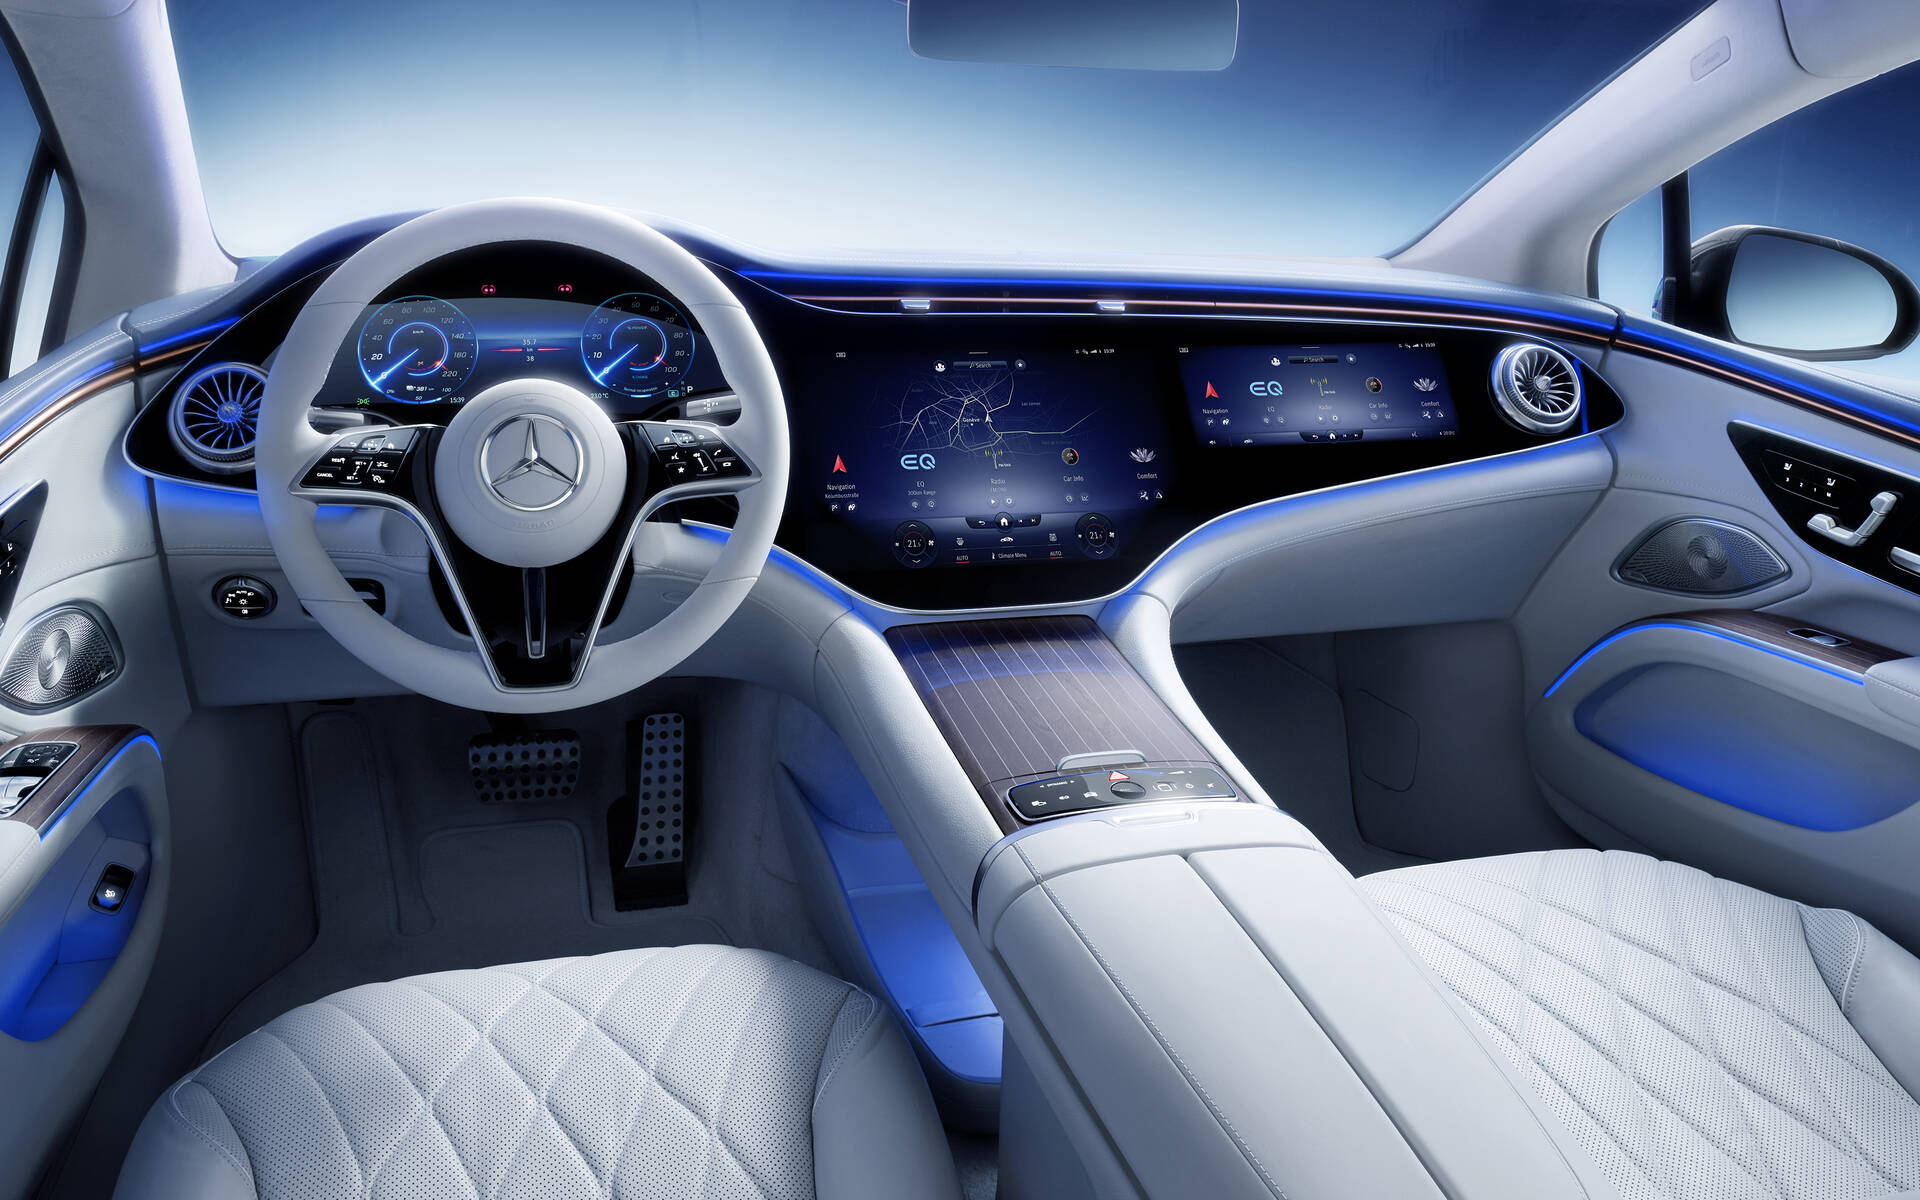 These are the 5 most luxurious car interiors in the world